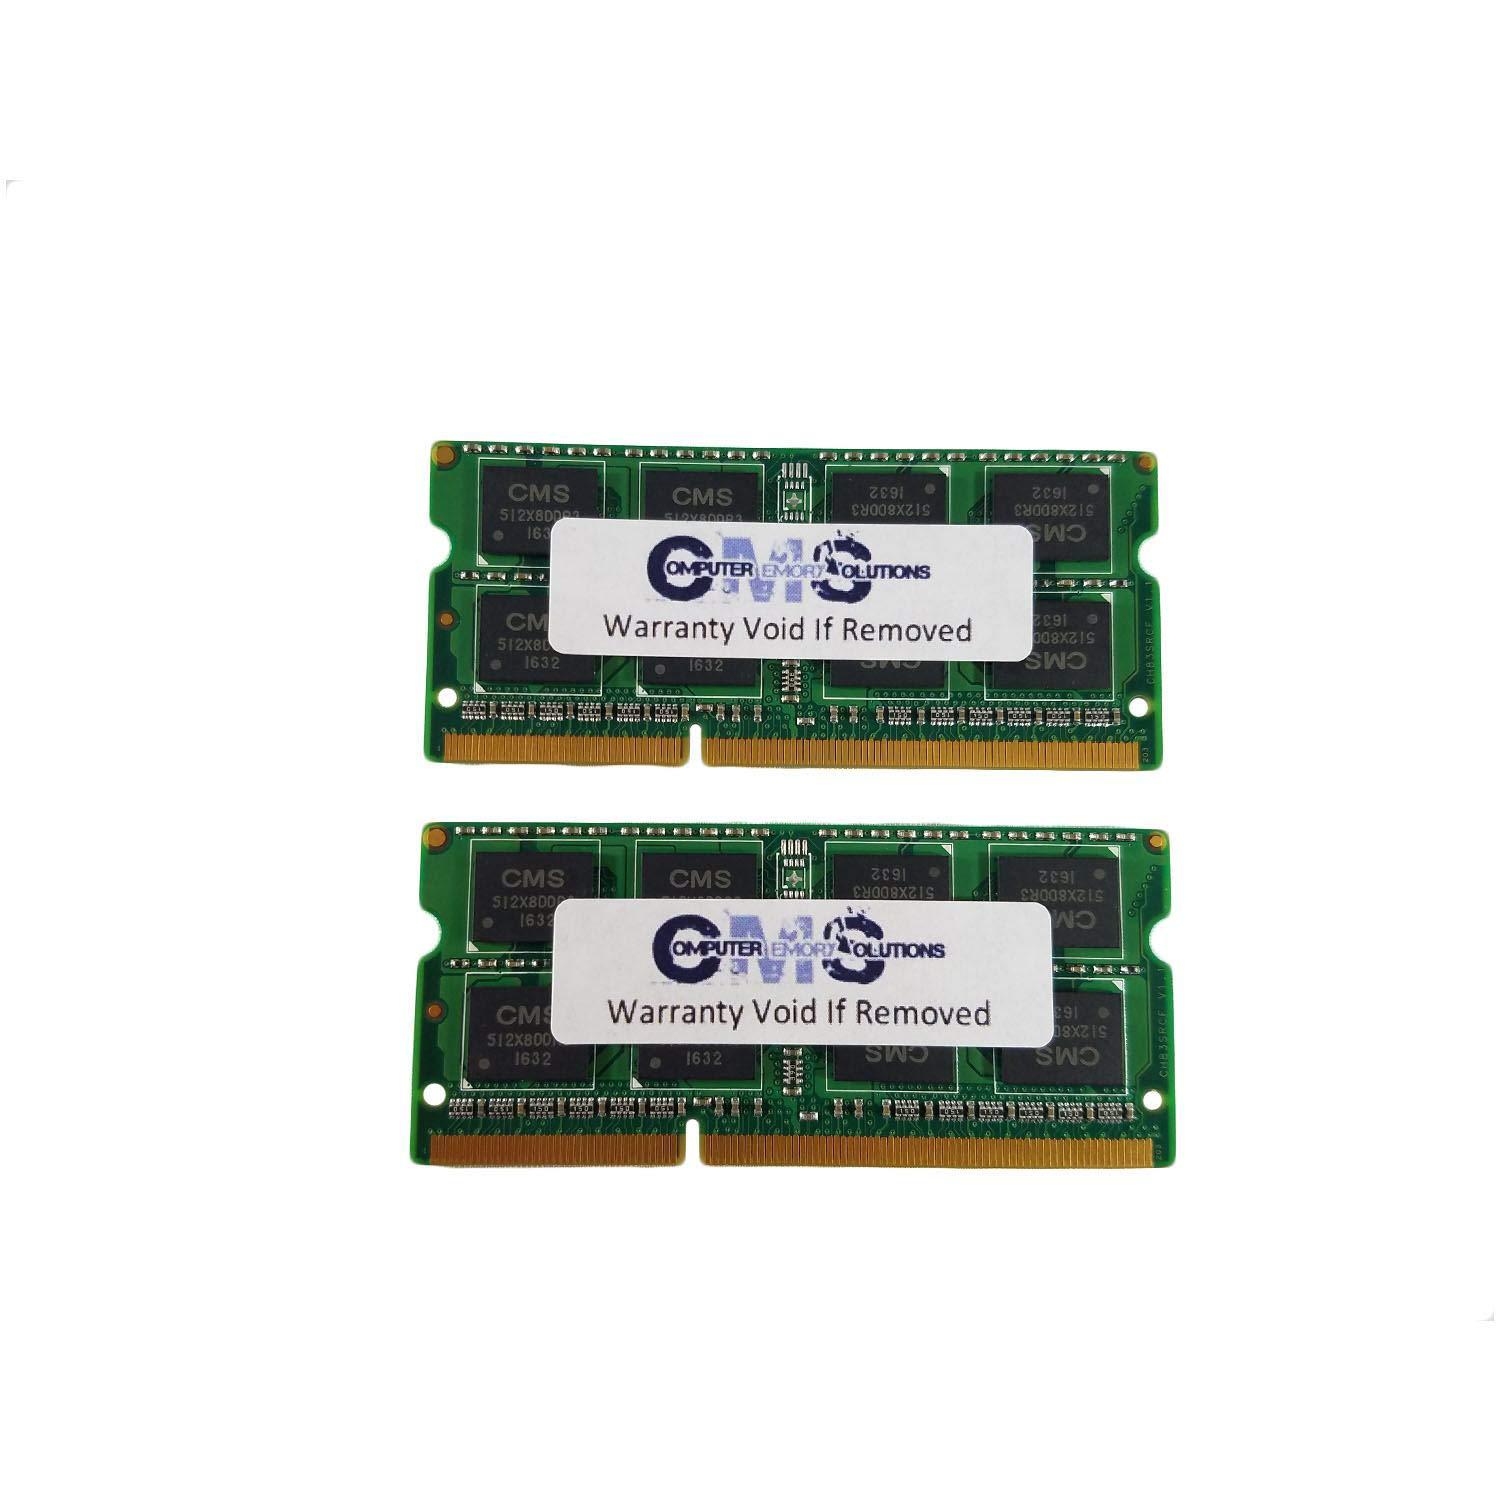 Computer Memory Solutions cms 16gb (2x8gb) ddr3 10600 1333mhz non ecc sodimm memory ram upgrade compatible with lenovo thinkpad x220 4287, 4290, 4291 d